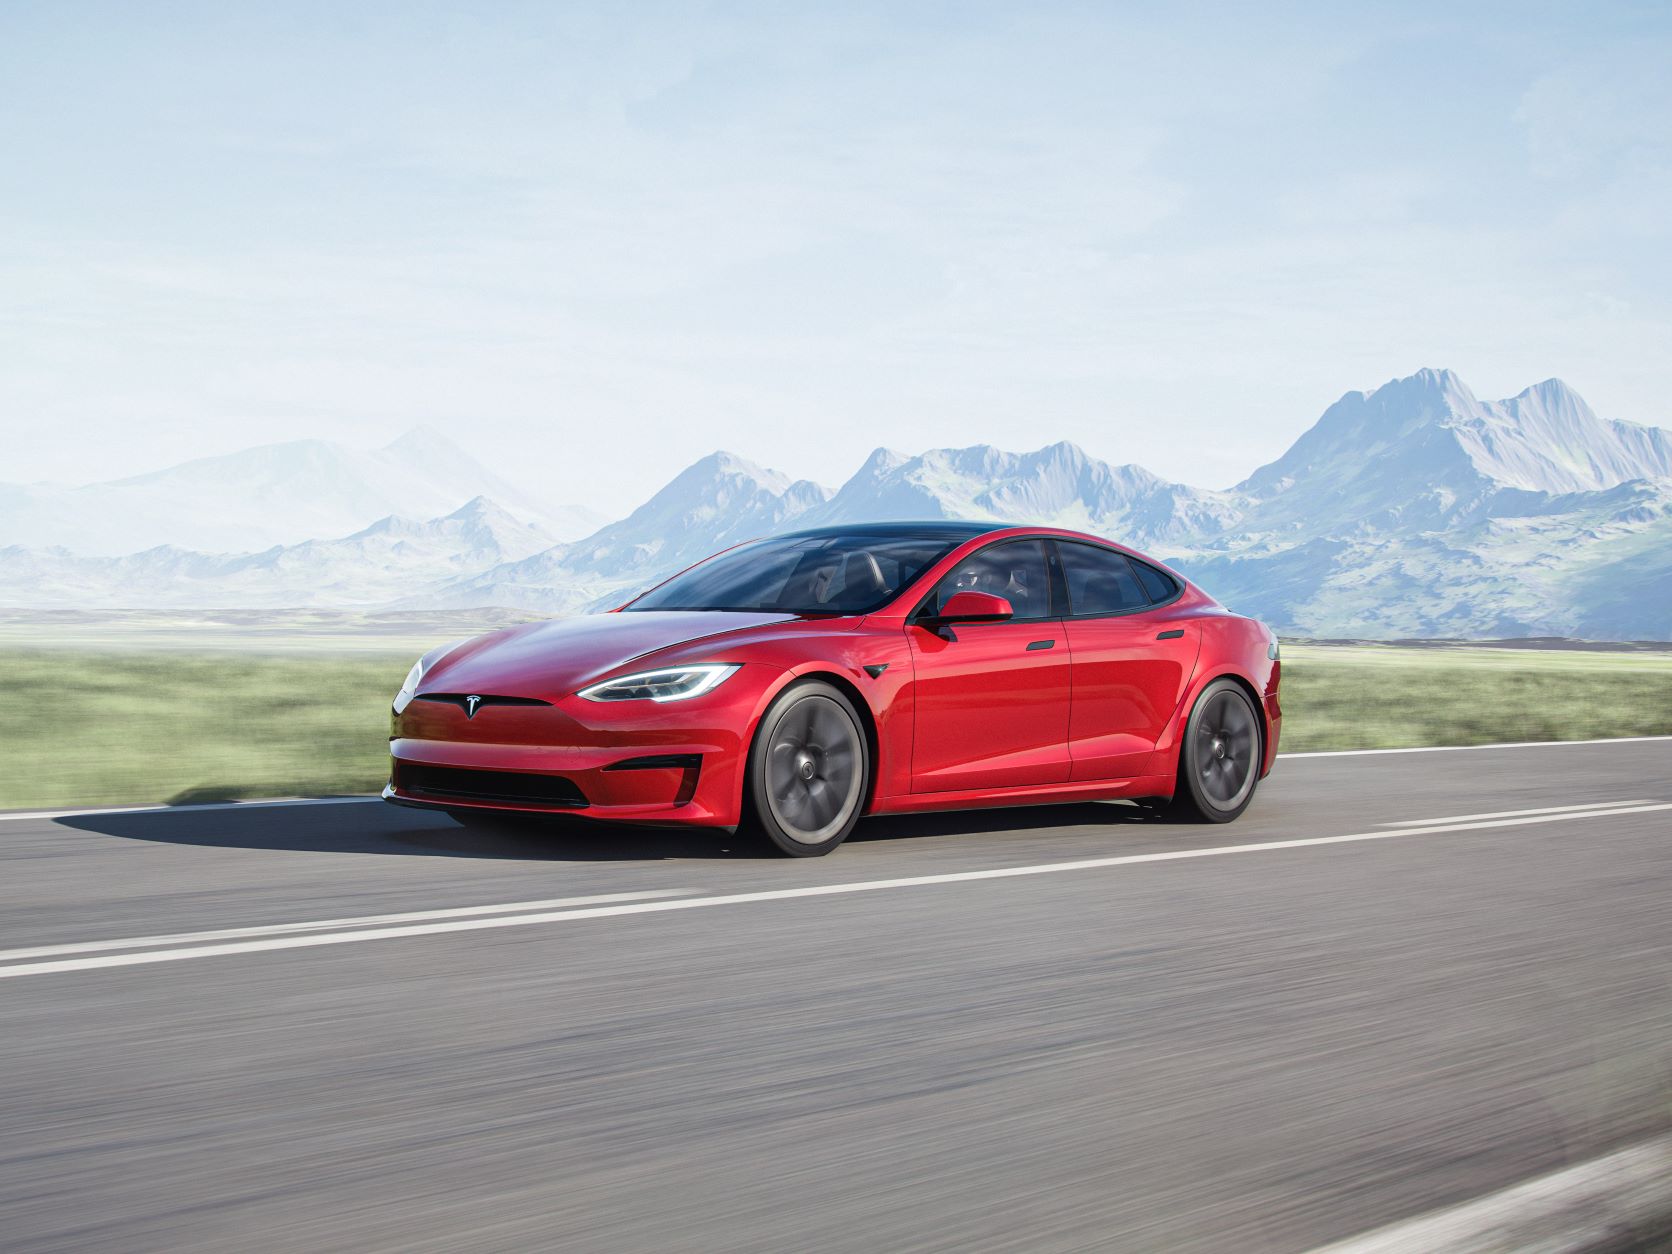 A fully loaded red 2022 Tesla Model S driving on a curvy road